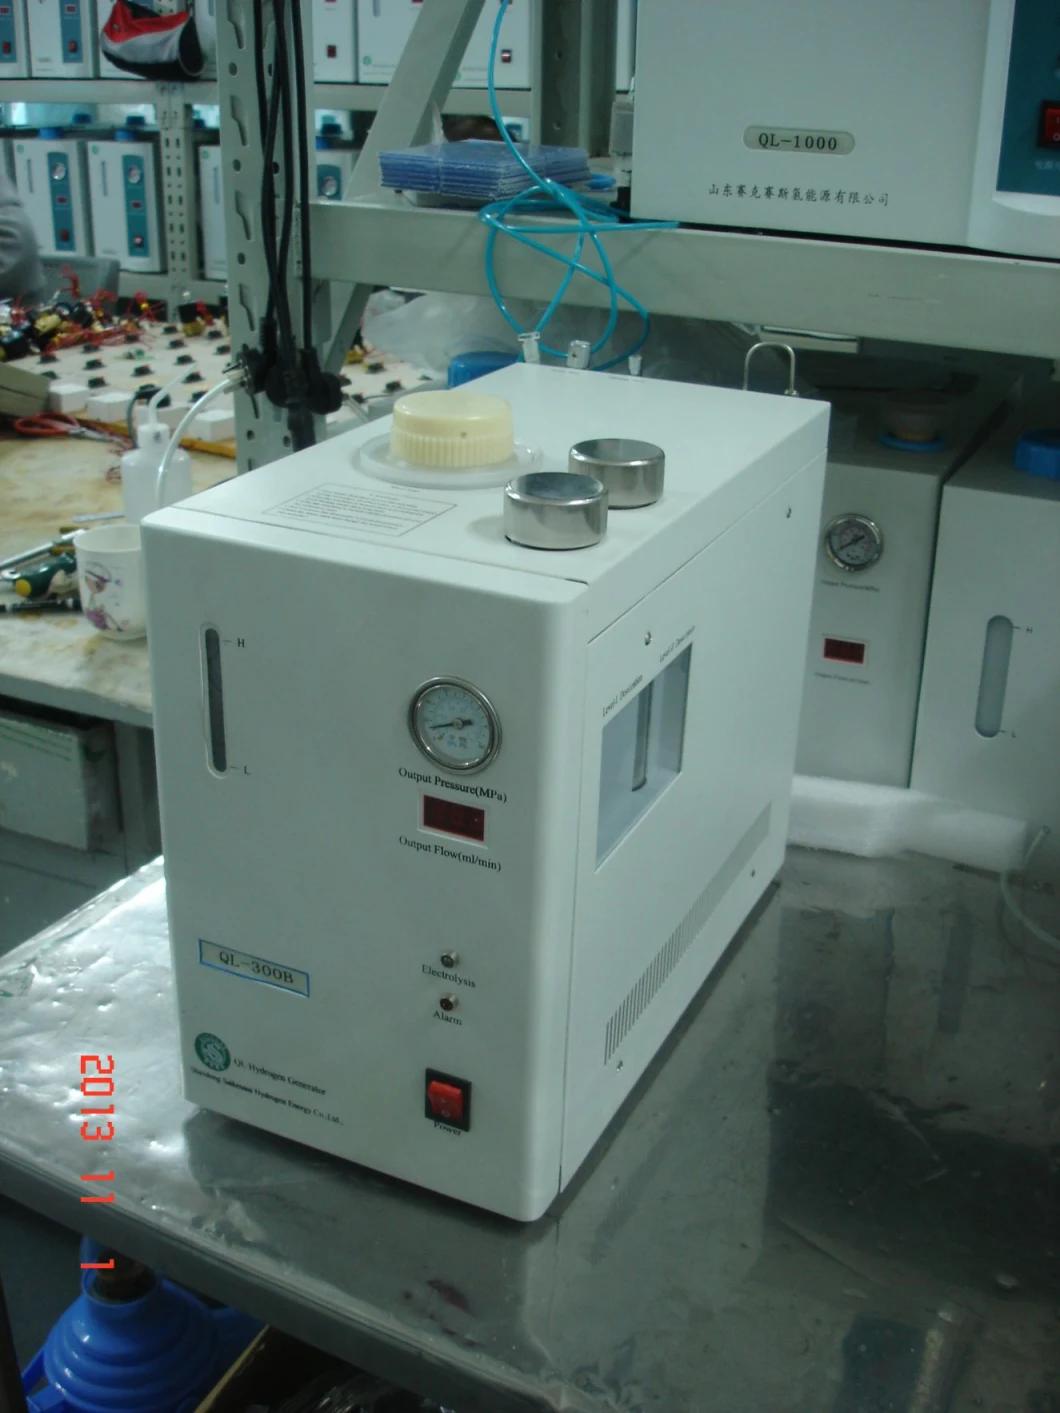 Ql-300 CE Certifiaction Water Electrolysis Instrument for Gas Chromatography